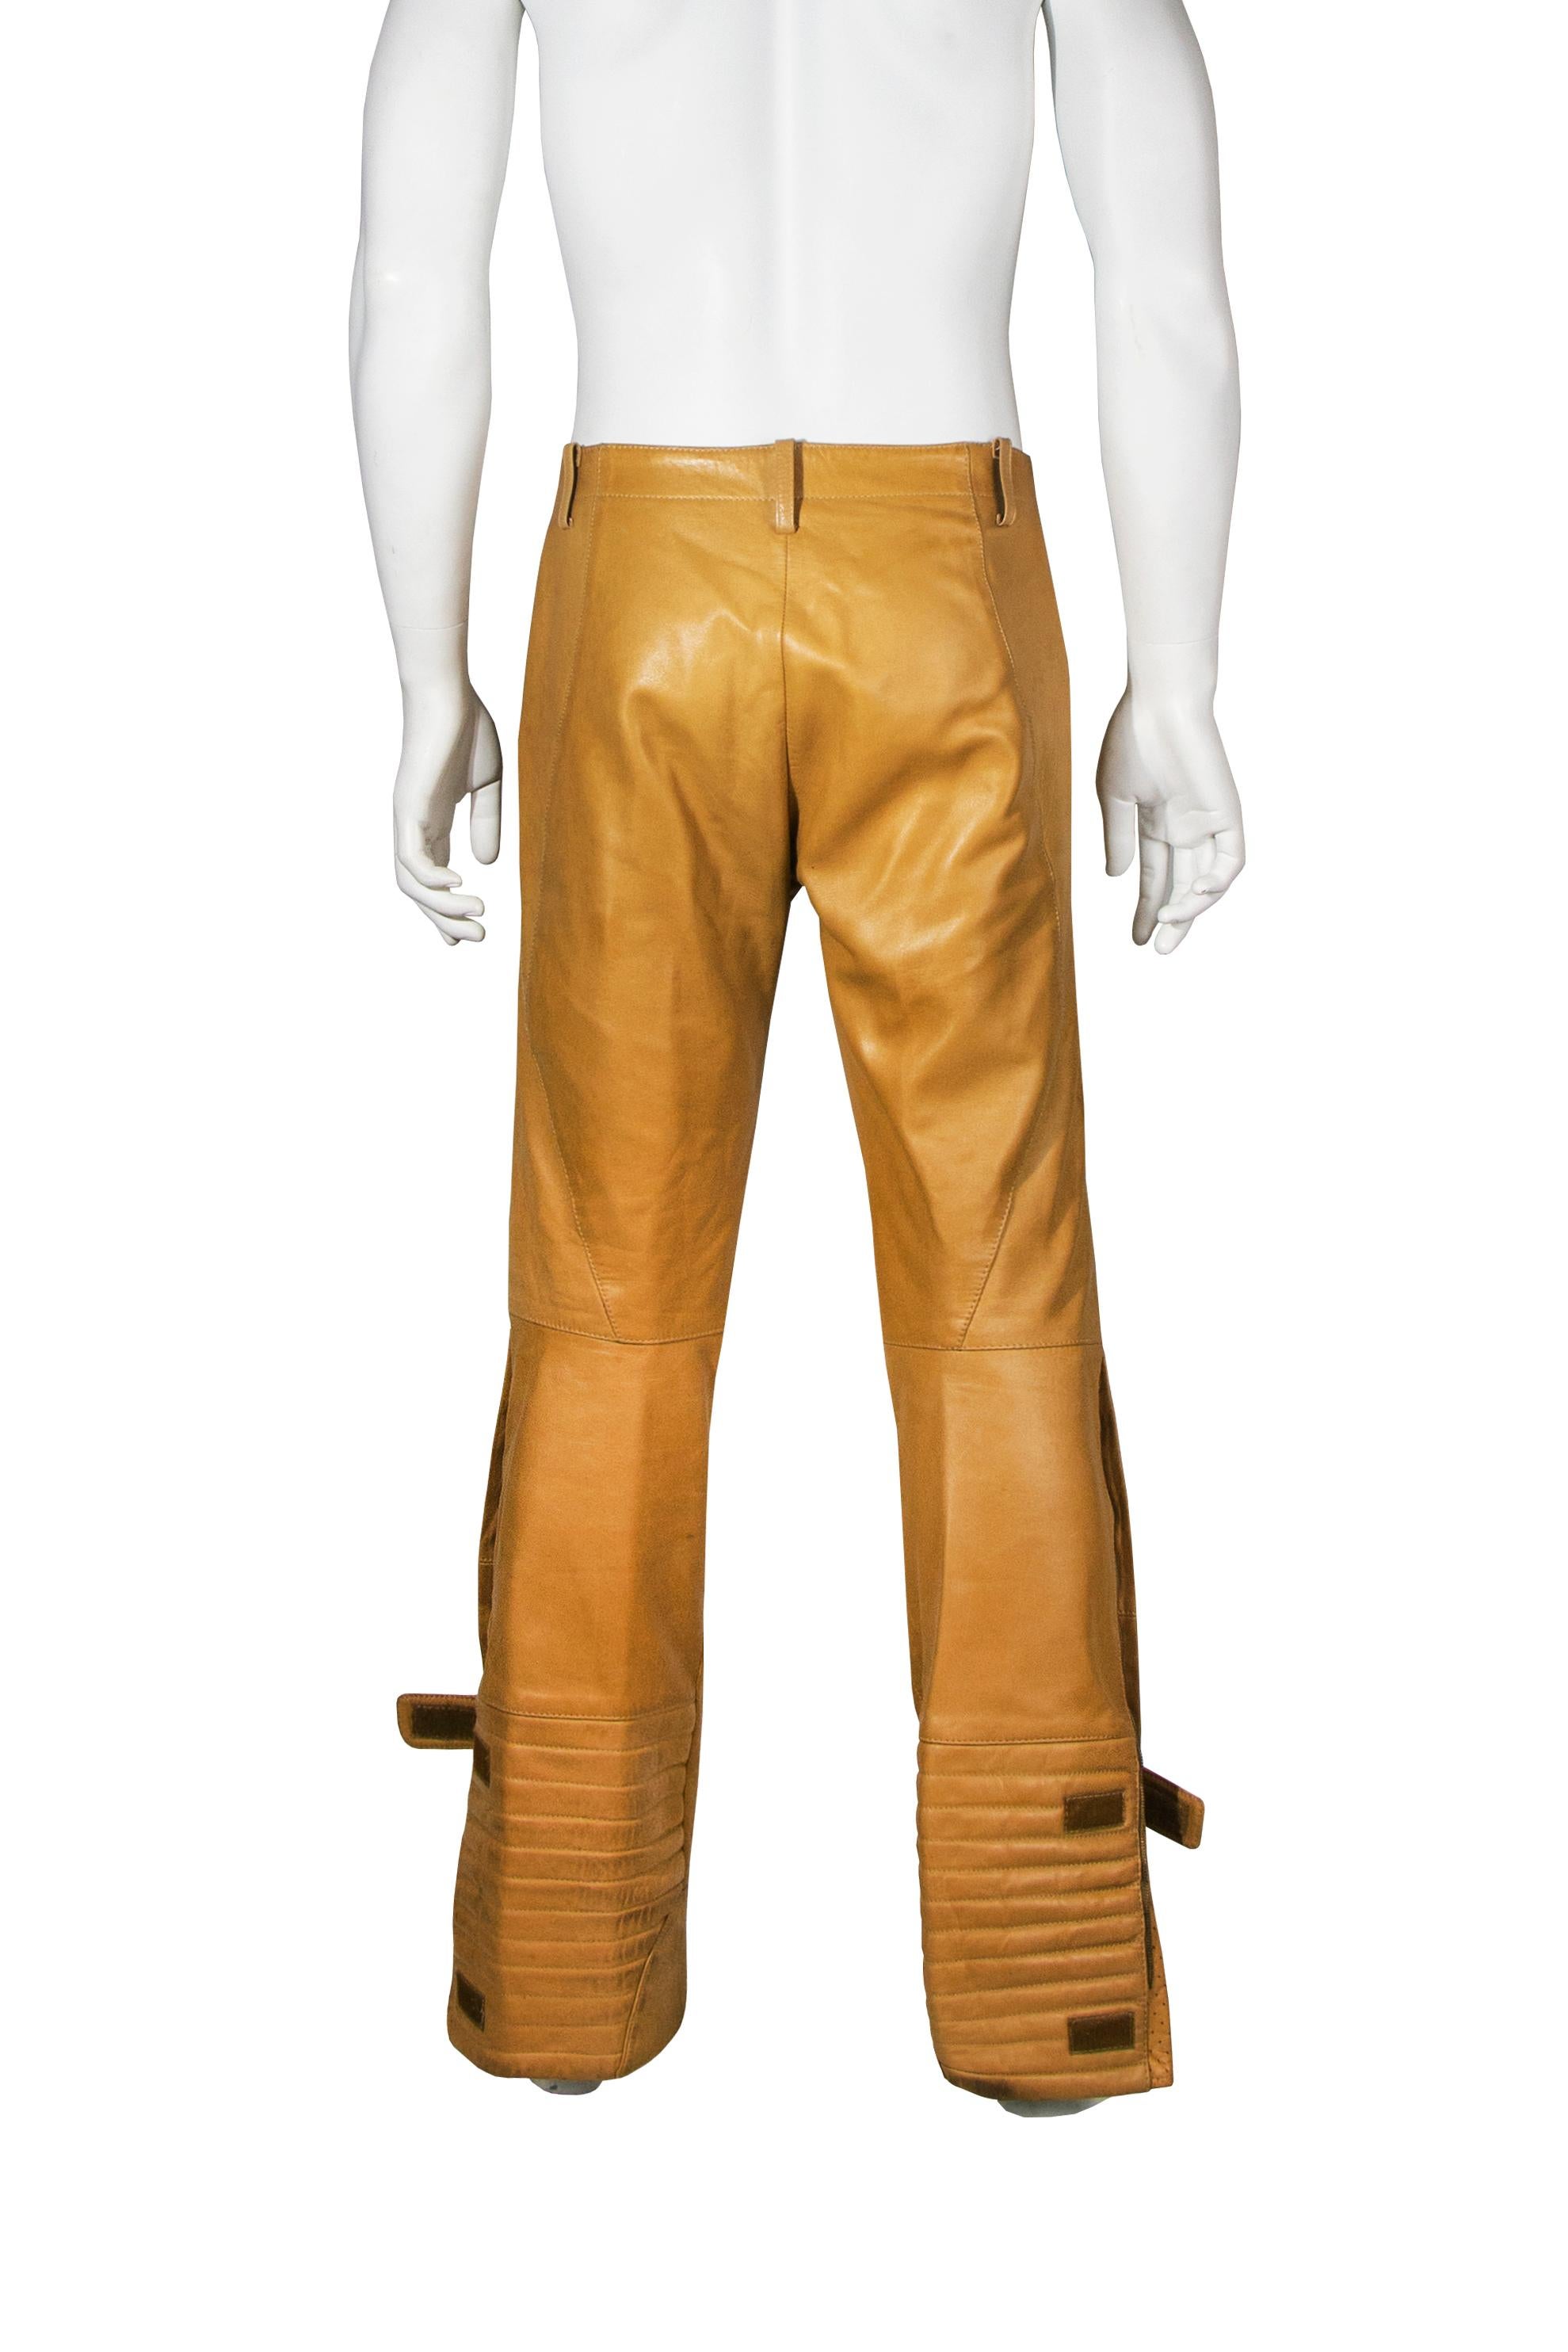 Gucci by Tom Ford men's tan leather motorcycle pants, fw 2000 For Sale 5